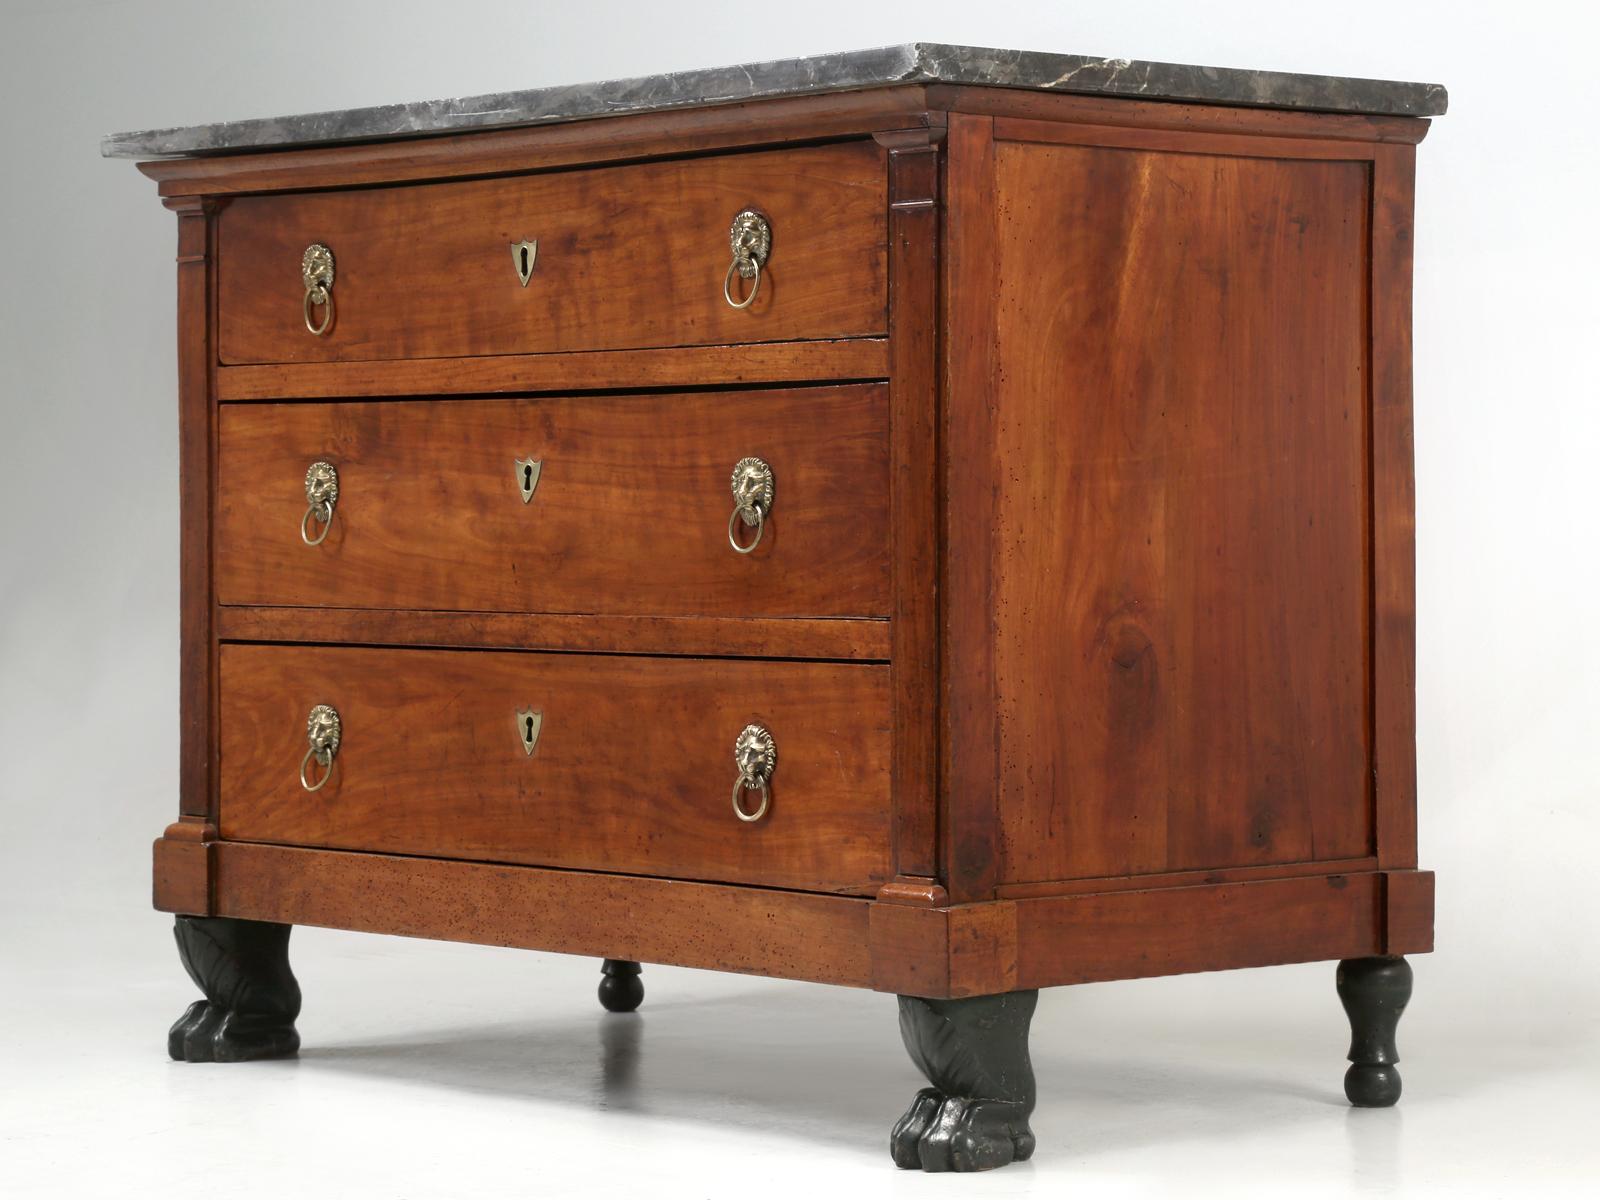 Antique French Empire style commode with its original marble top. Our Old Plank restoration department completely rebuilt the drawers and the entire frame, but restrained from refinishing the mahogany. We of course enhanced the original French lion